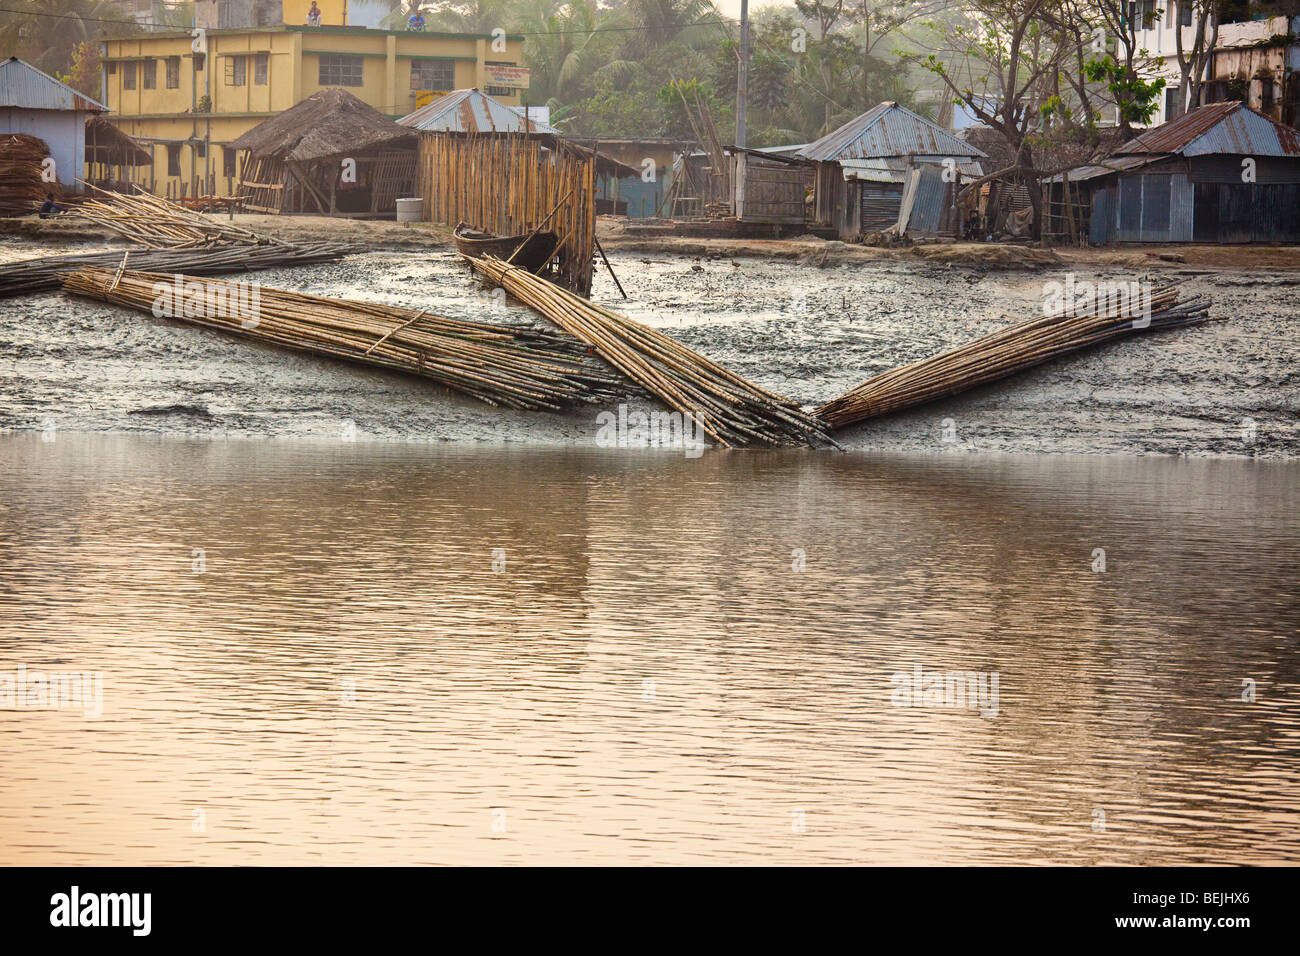 Seen from the Rocket: Bamboo waiting for transport on the Brahmaputra river in Bangladesh Stock Photo